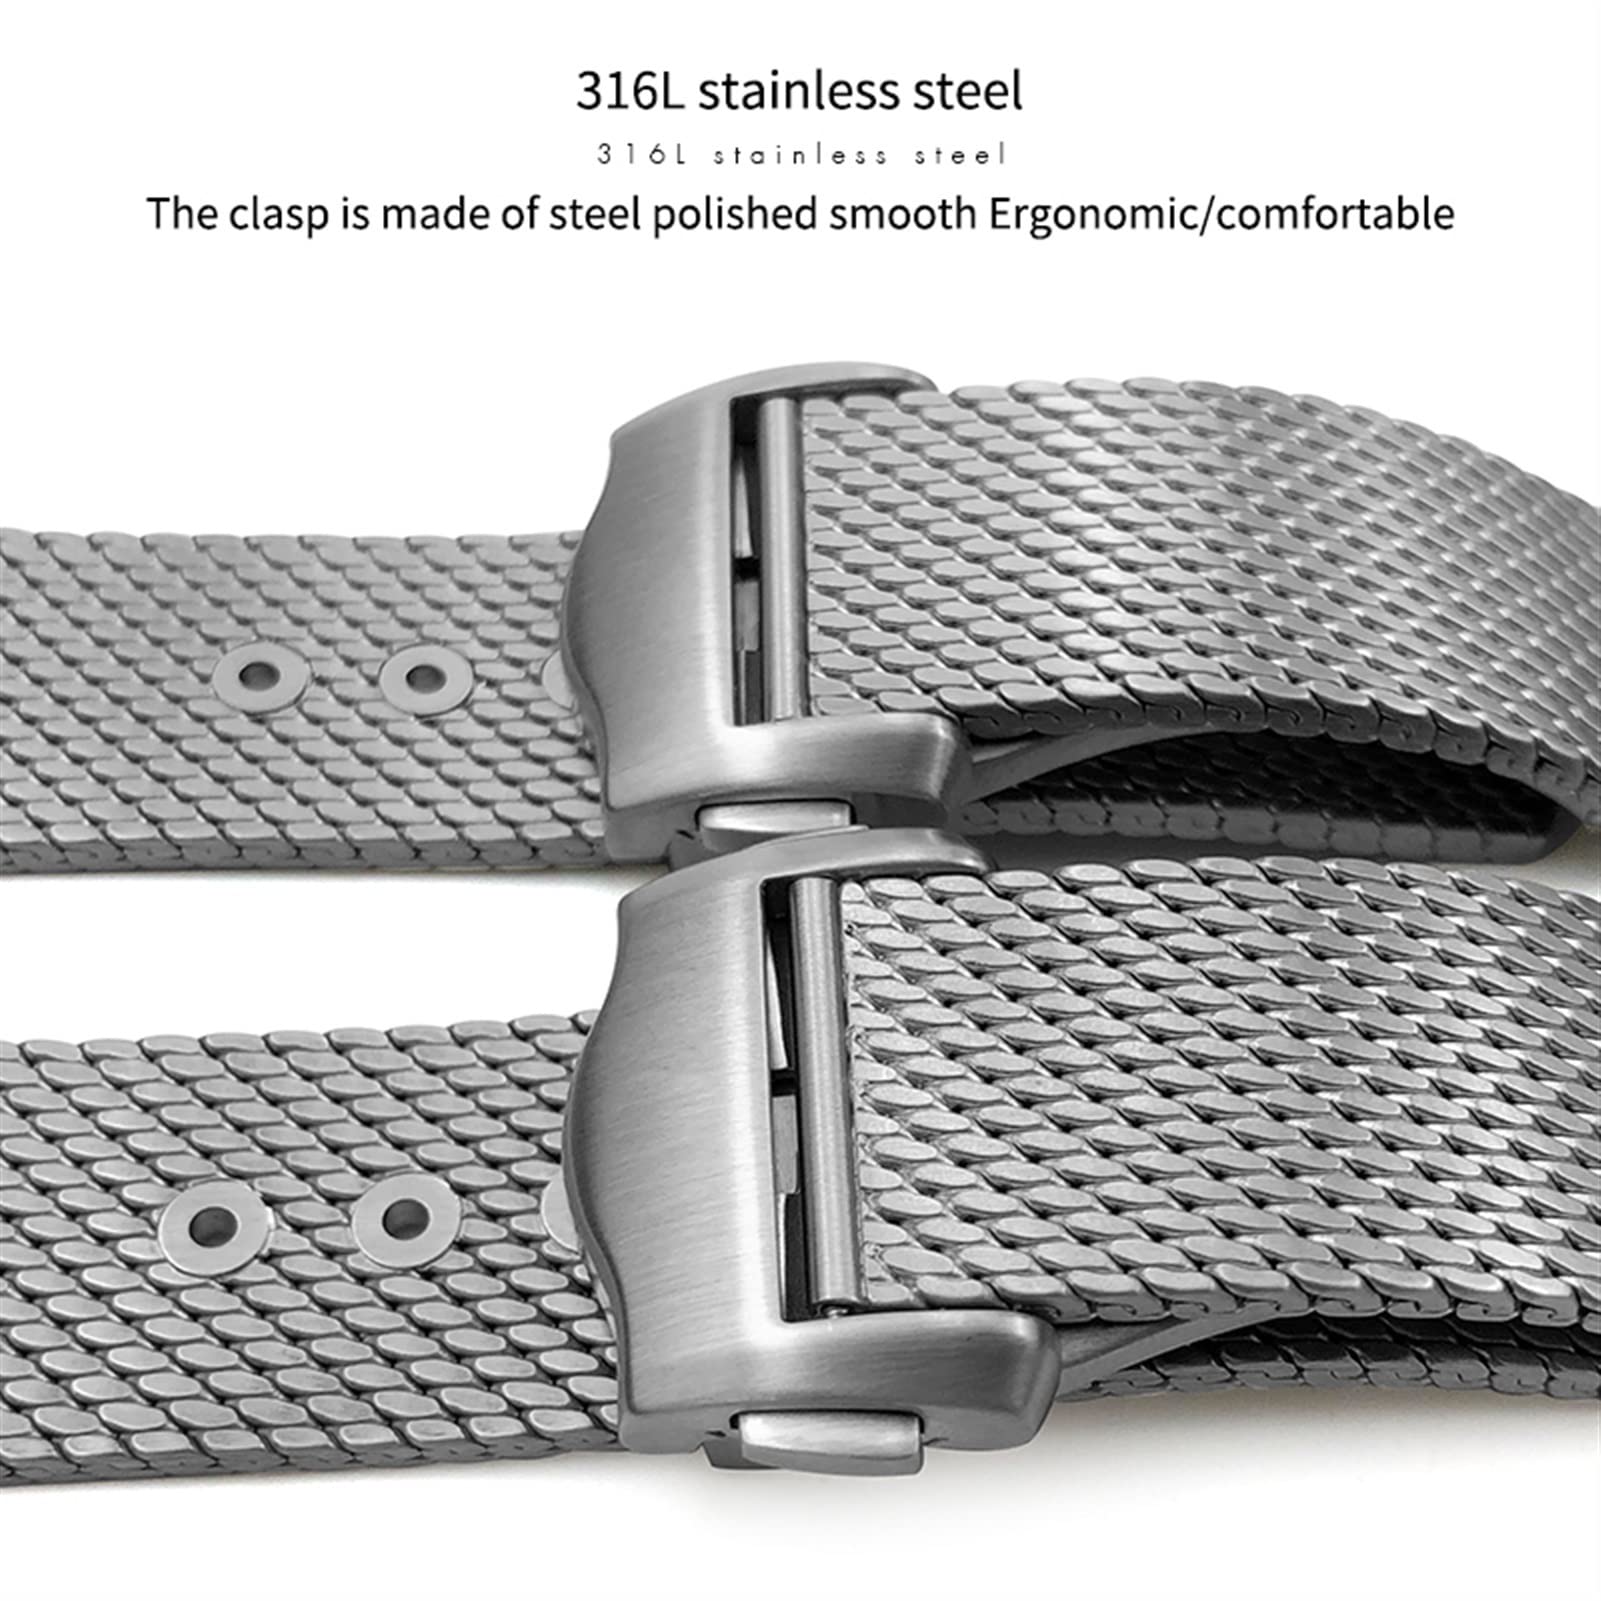 Wscebck 20mm Titanium Steel Braided Watchband Fit for Omega 007 Seamaster James Bond Watch Band Strap Deployment Buckle (Color : Silver, Size : for Omega 20mm)